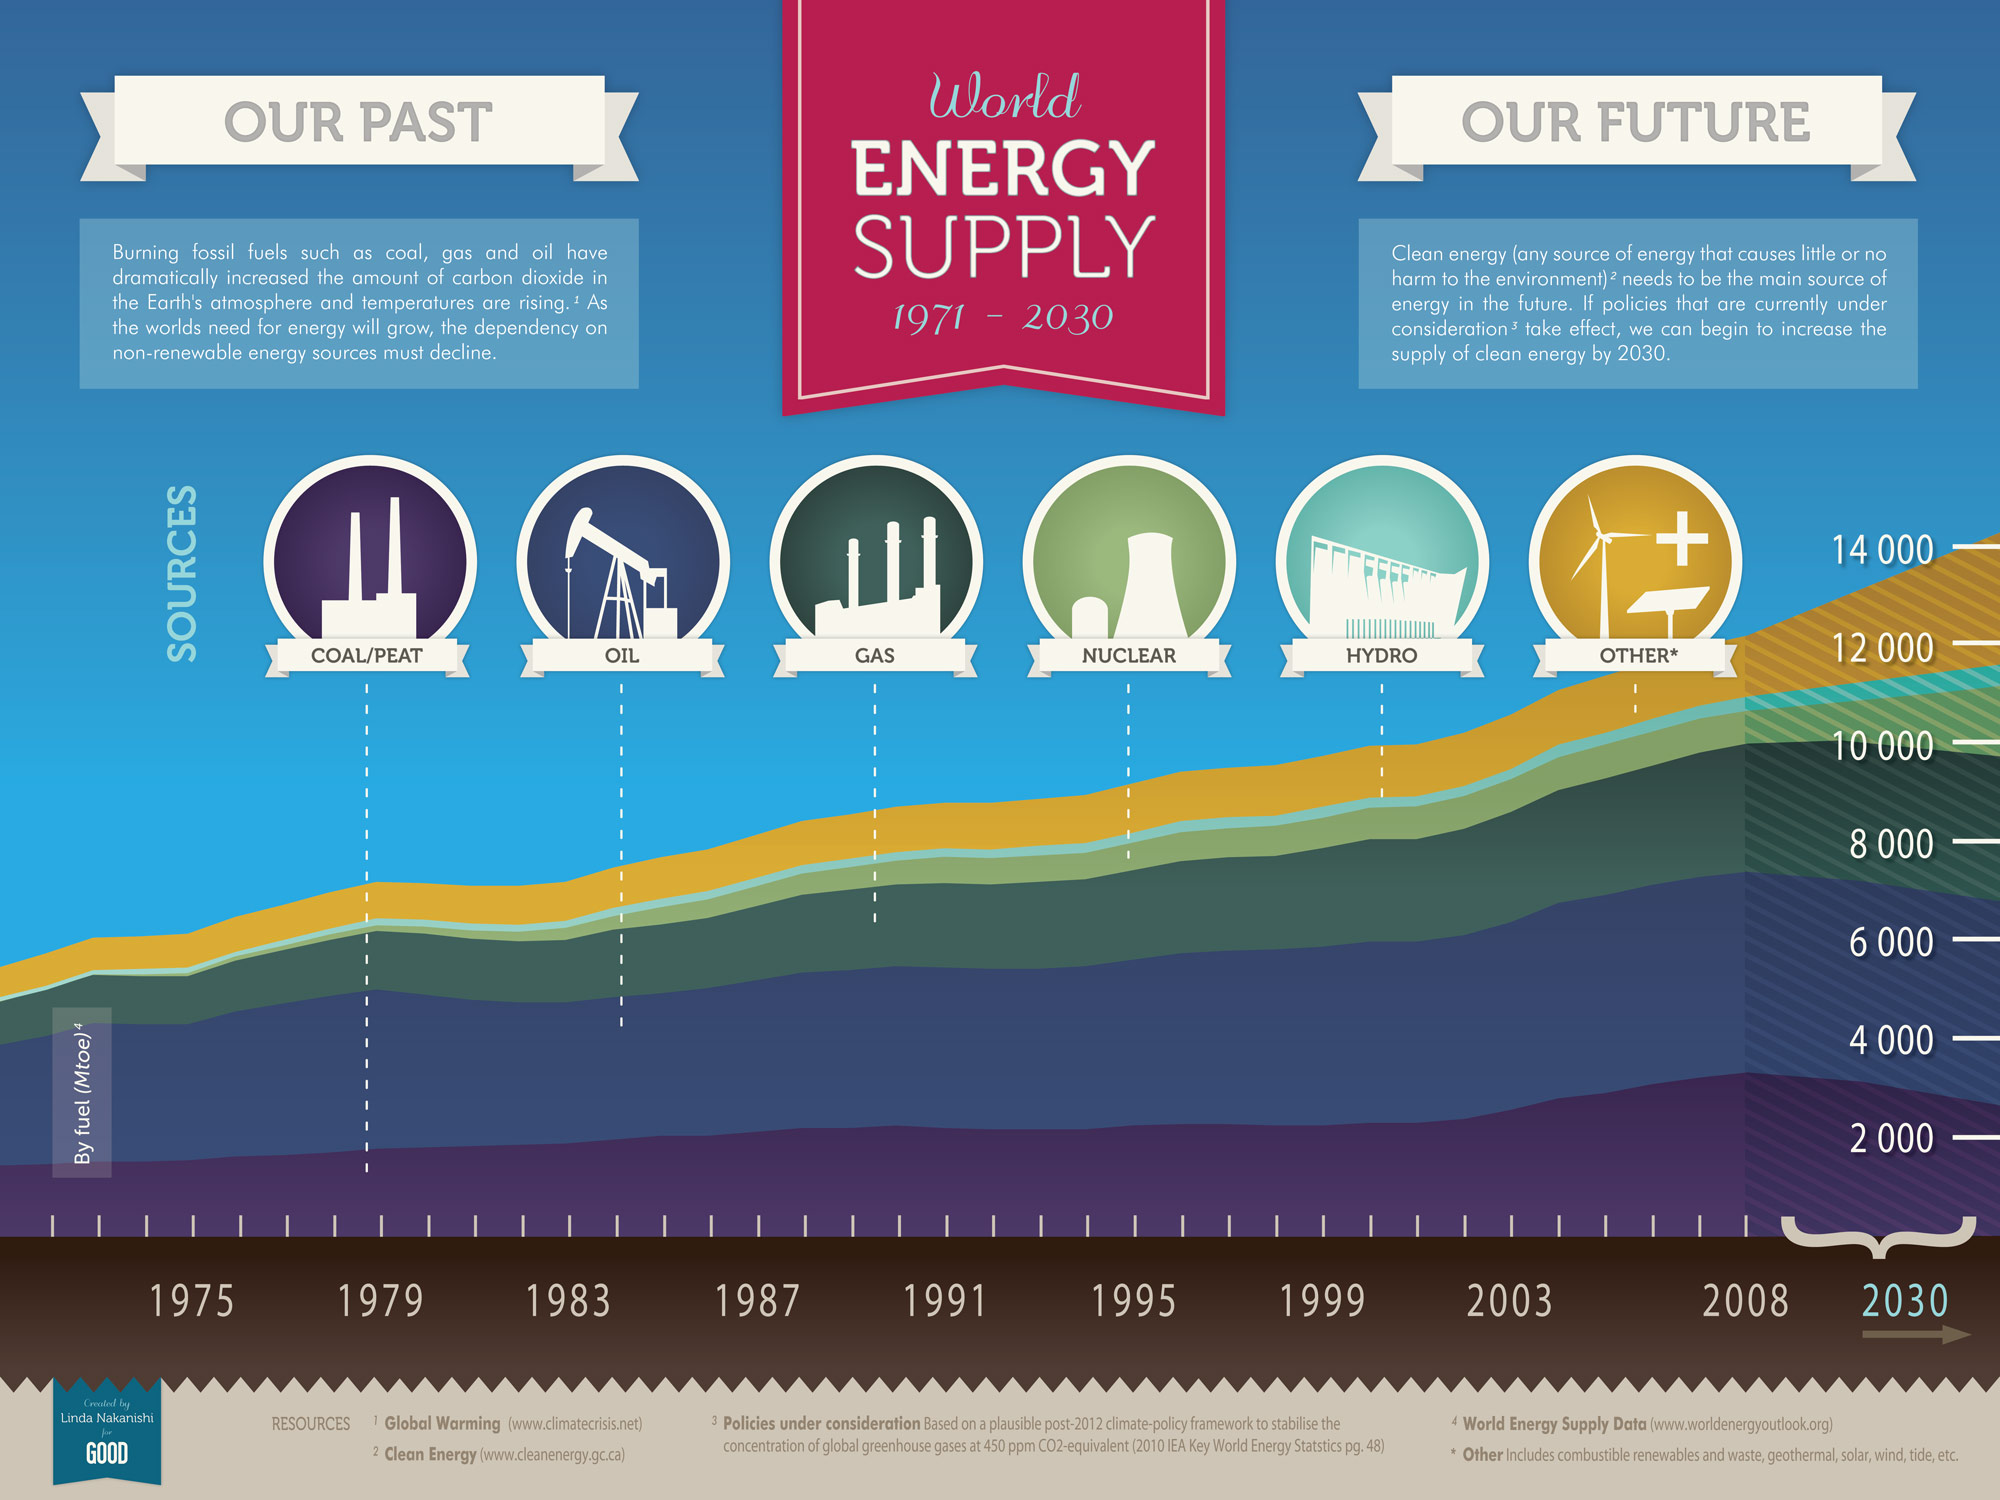 case study energy supply in a country or area